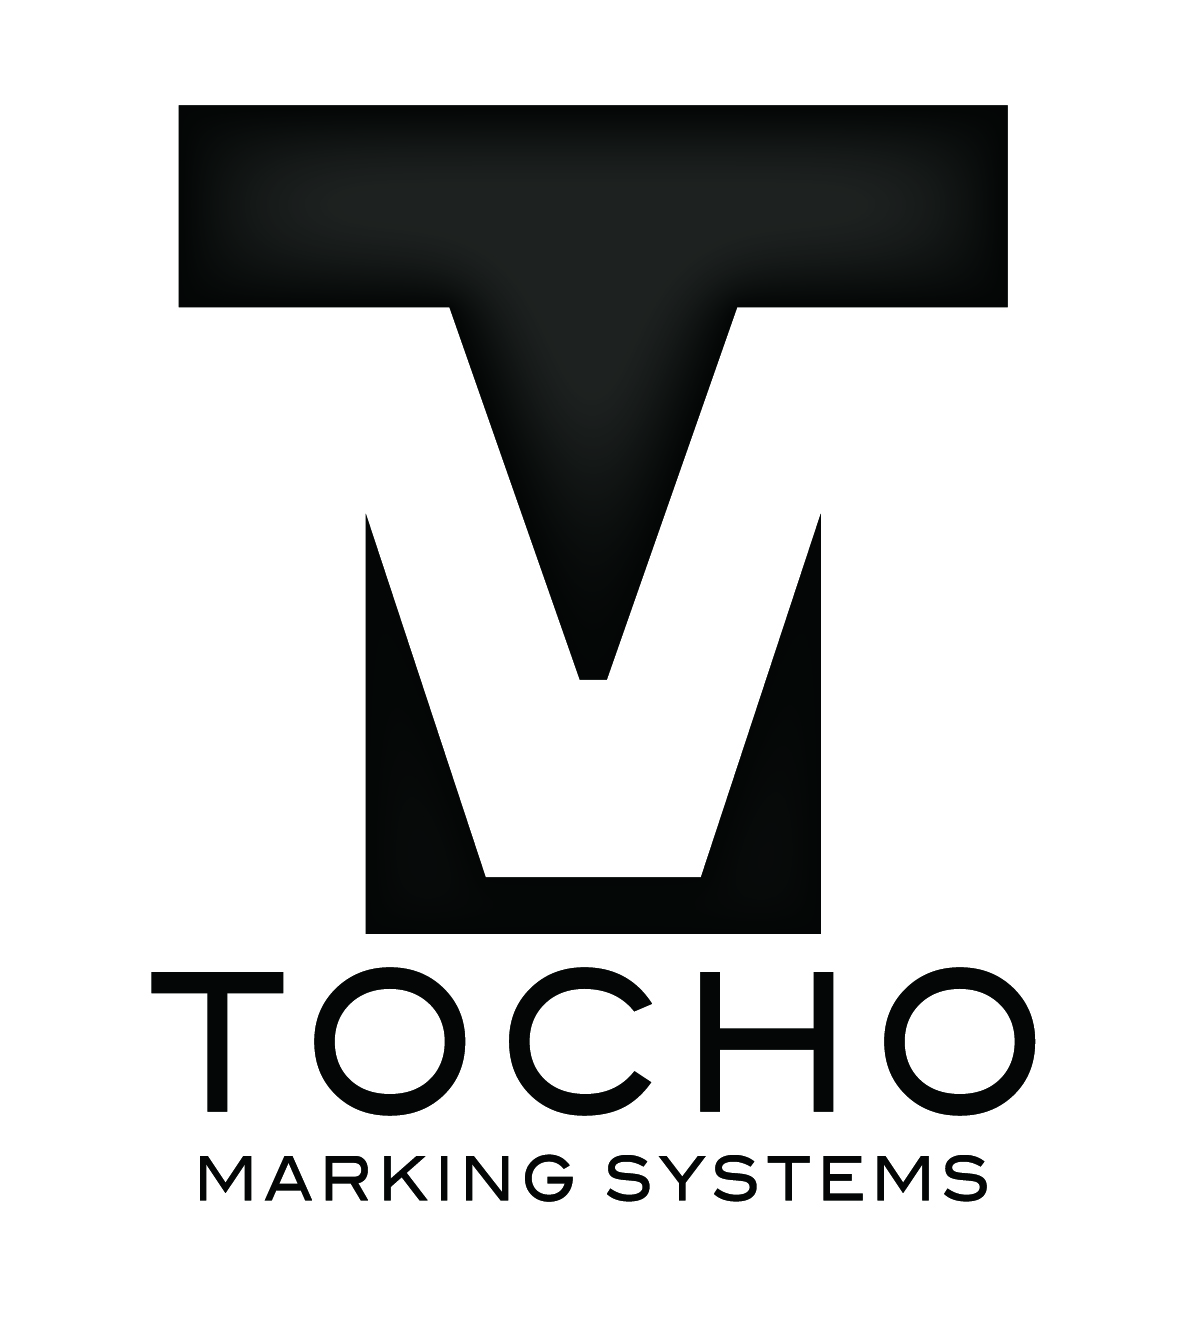 Tocho marking systems